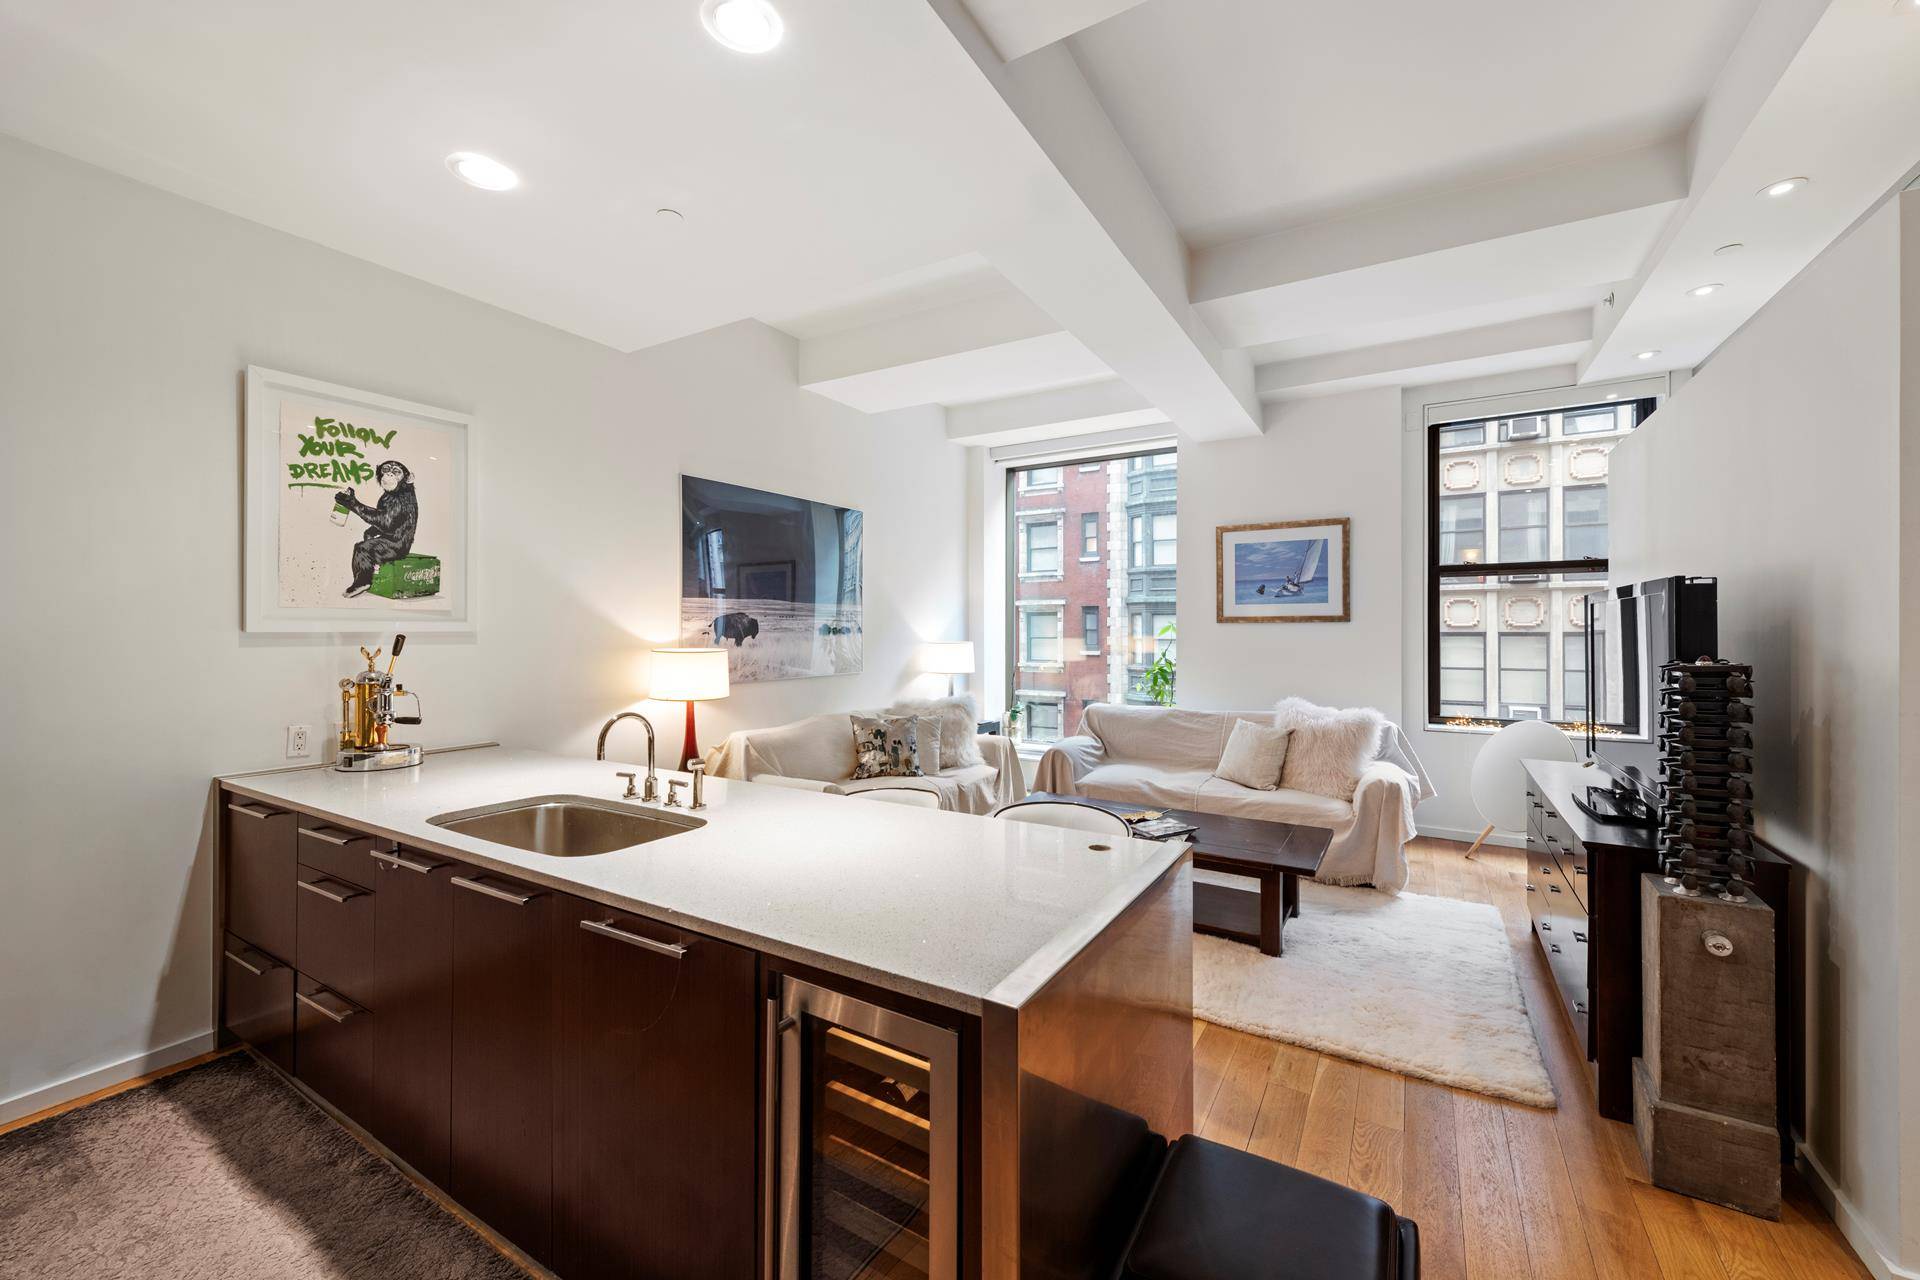 You have found your very own gorgeous 1br 1ba sunlight filled loft apartment with stunning finishes.